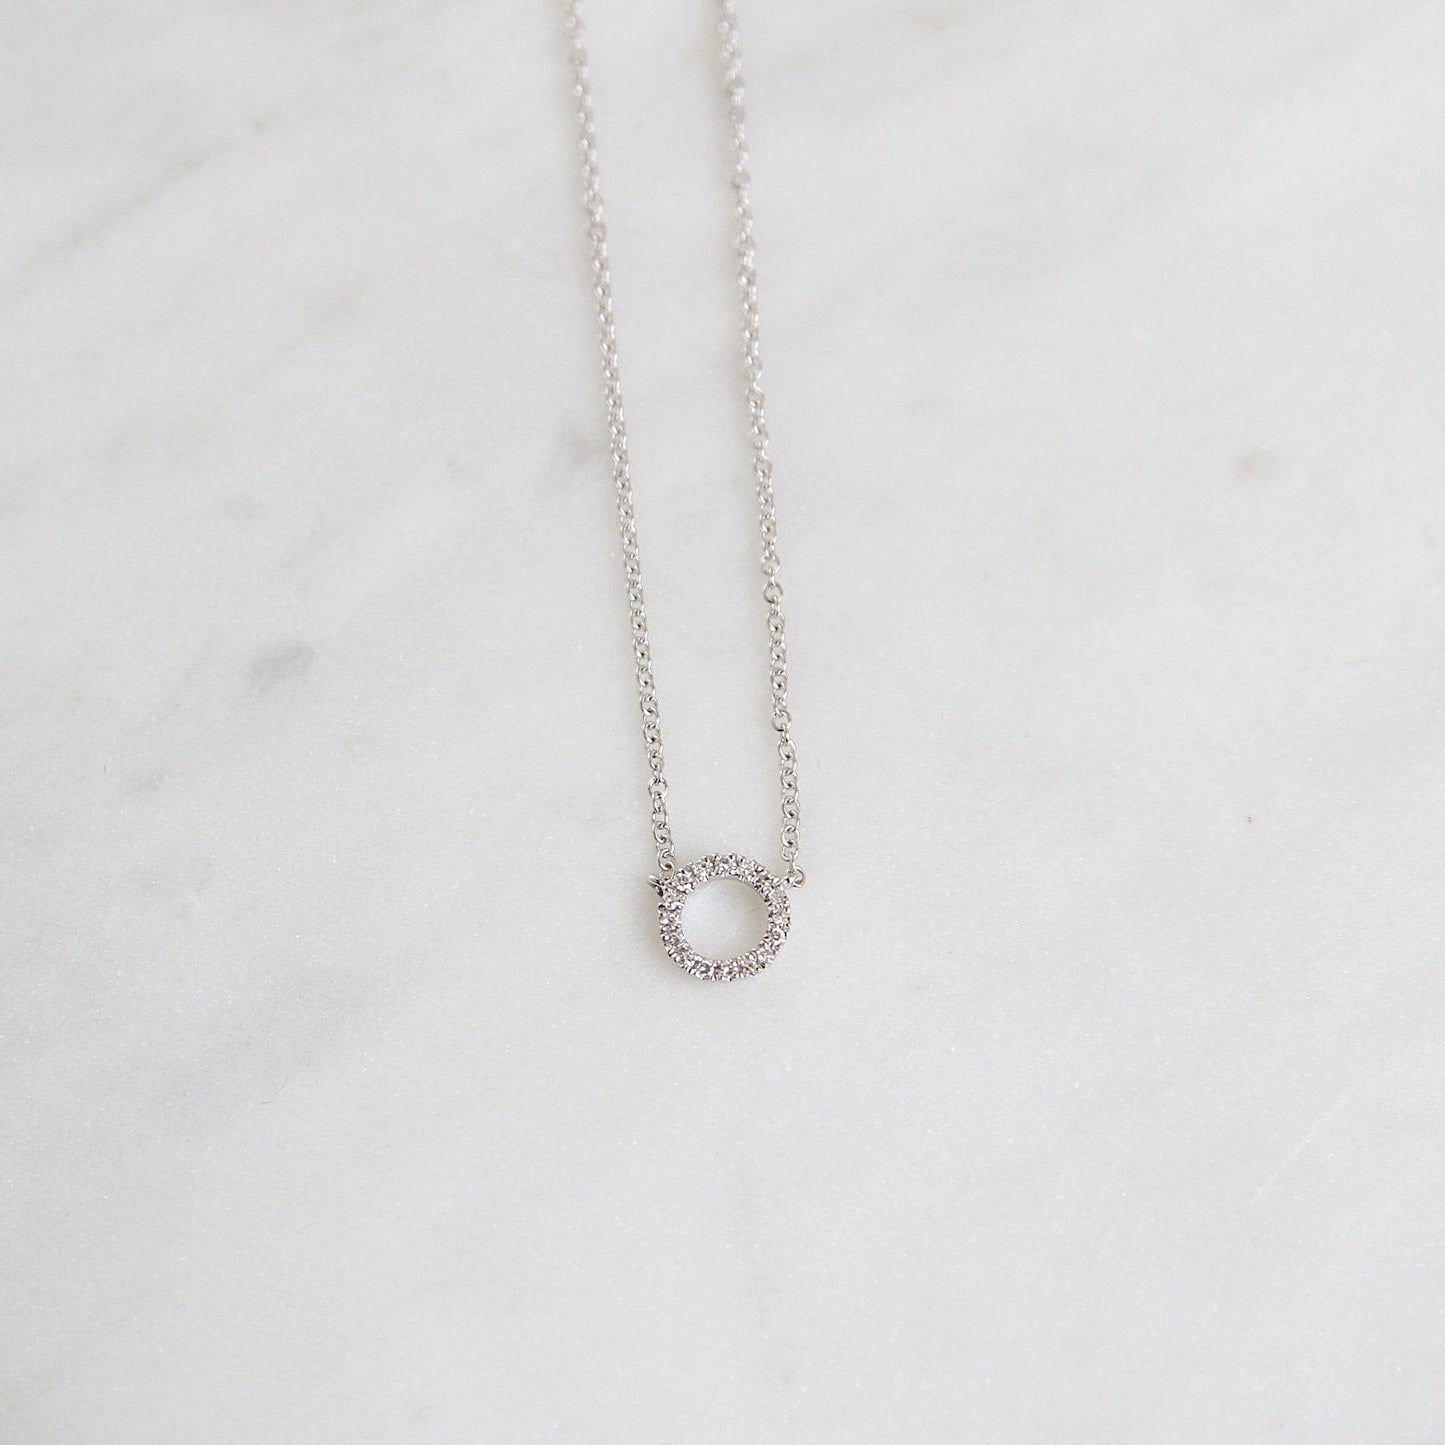 Load image into Gallery viewer, NKL-14K 14k White Gold Small Open Circle Necklace
